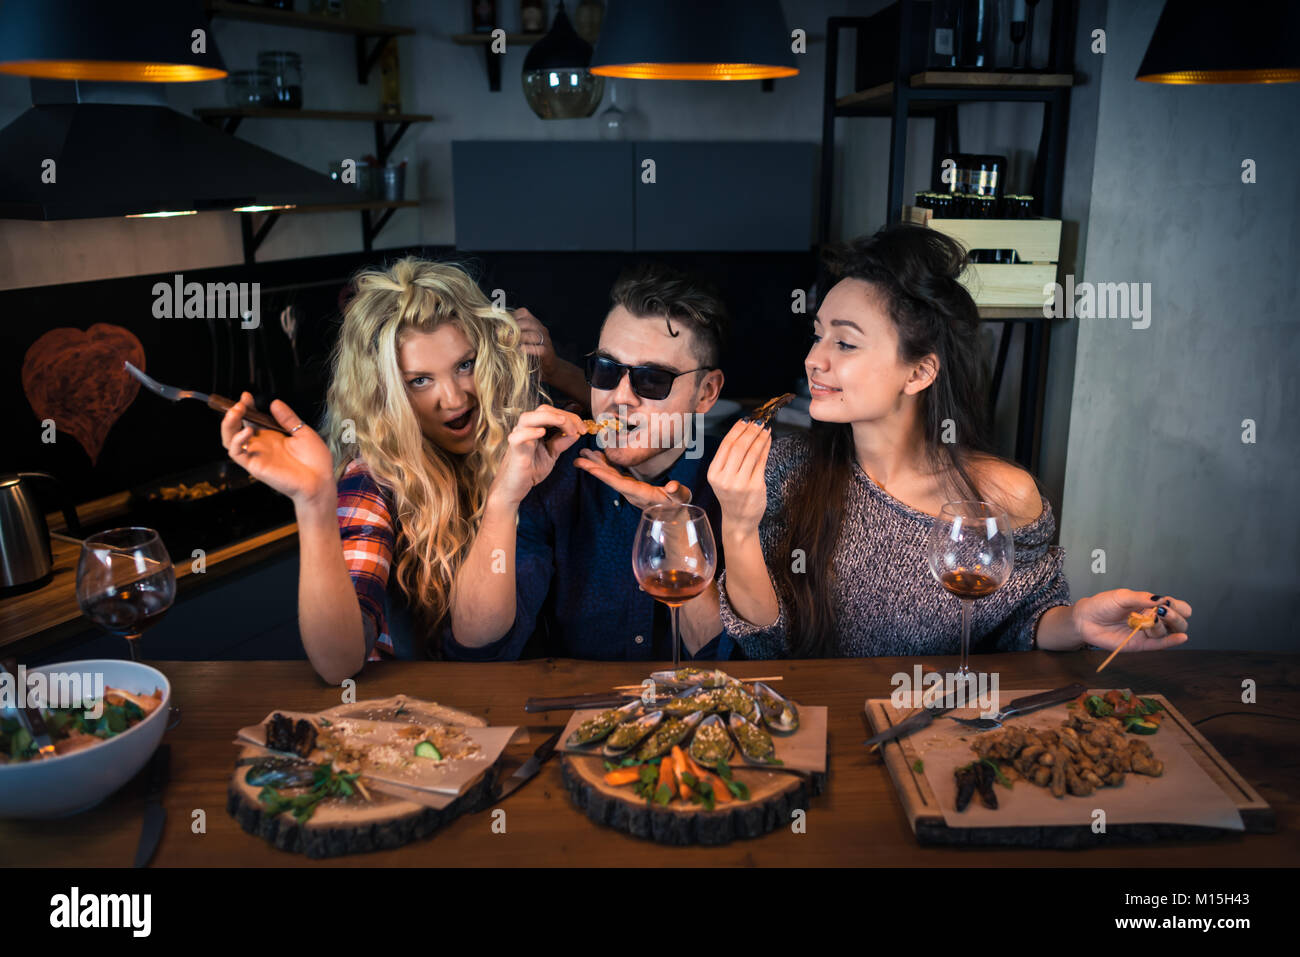 Two young women with a man smiles and has dinner together at the bar counter. Group of beautiful people and eats food with wine and enjoying evening Stock Photo